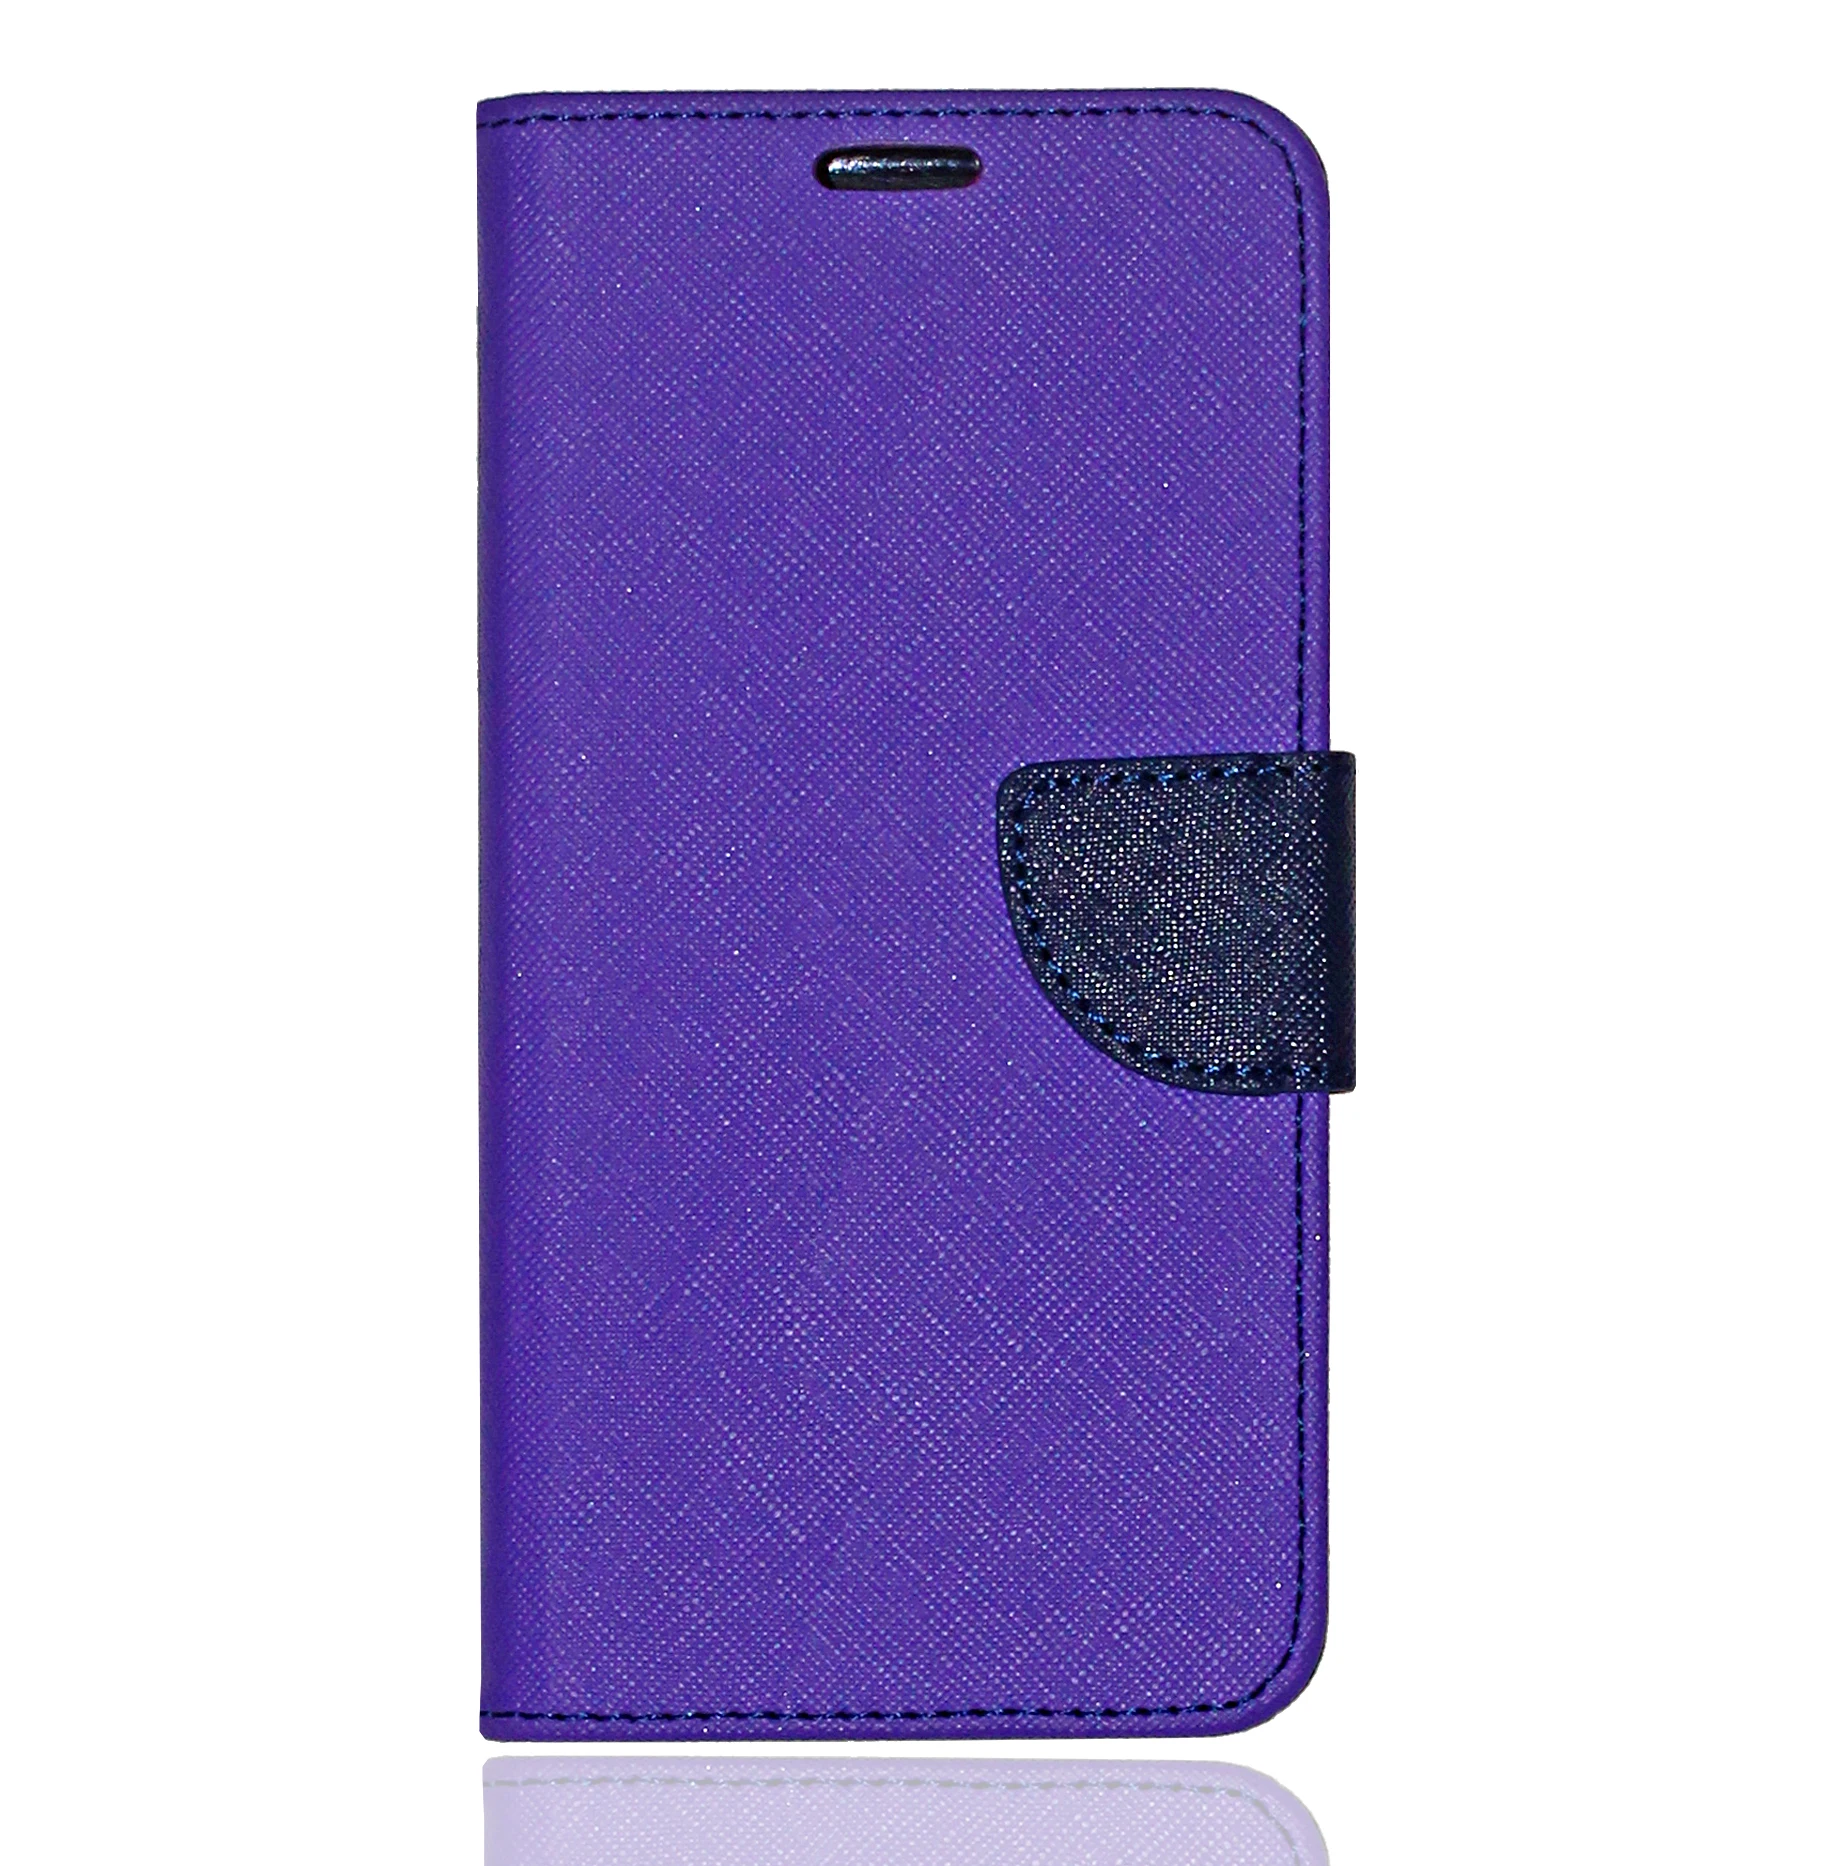 Wallet Leather Case Card Pocket Cover For Meizu 15 16S 16X M15 M2 M3 M5 M5C M5S M6 M6S M6T A5 Mini Lite Note 2 3 6 8 9 X8 C9 best meizu phone cases